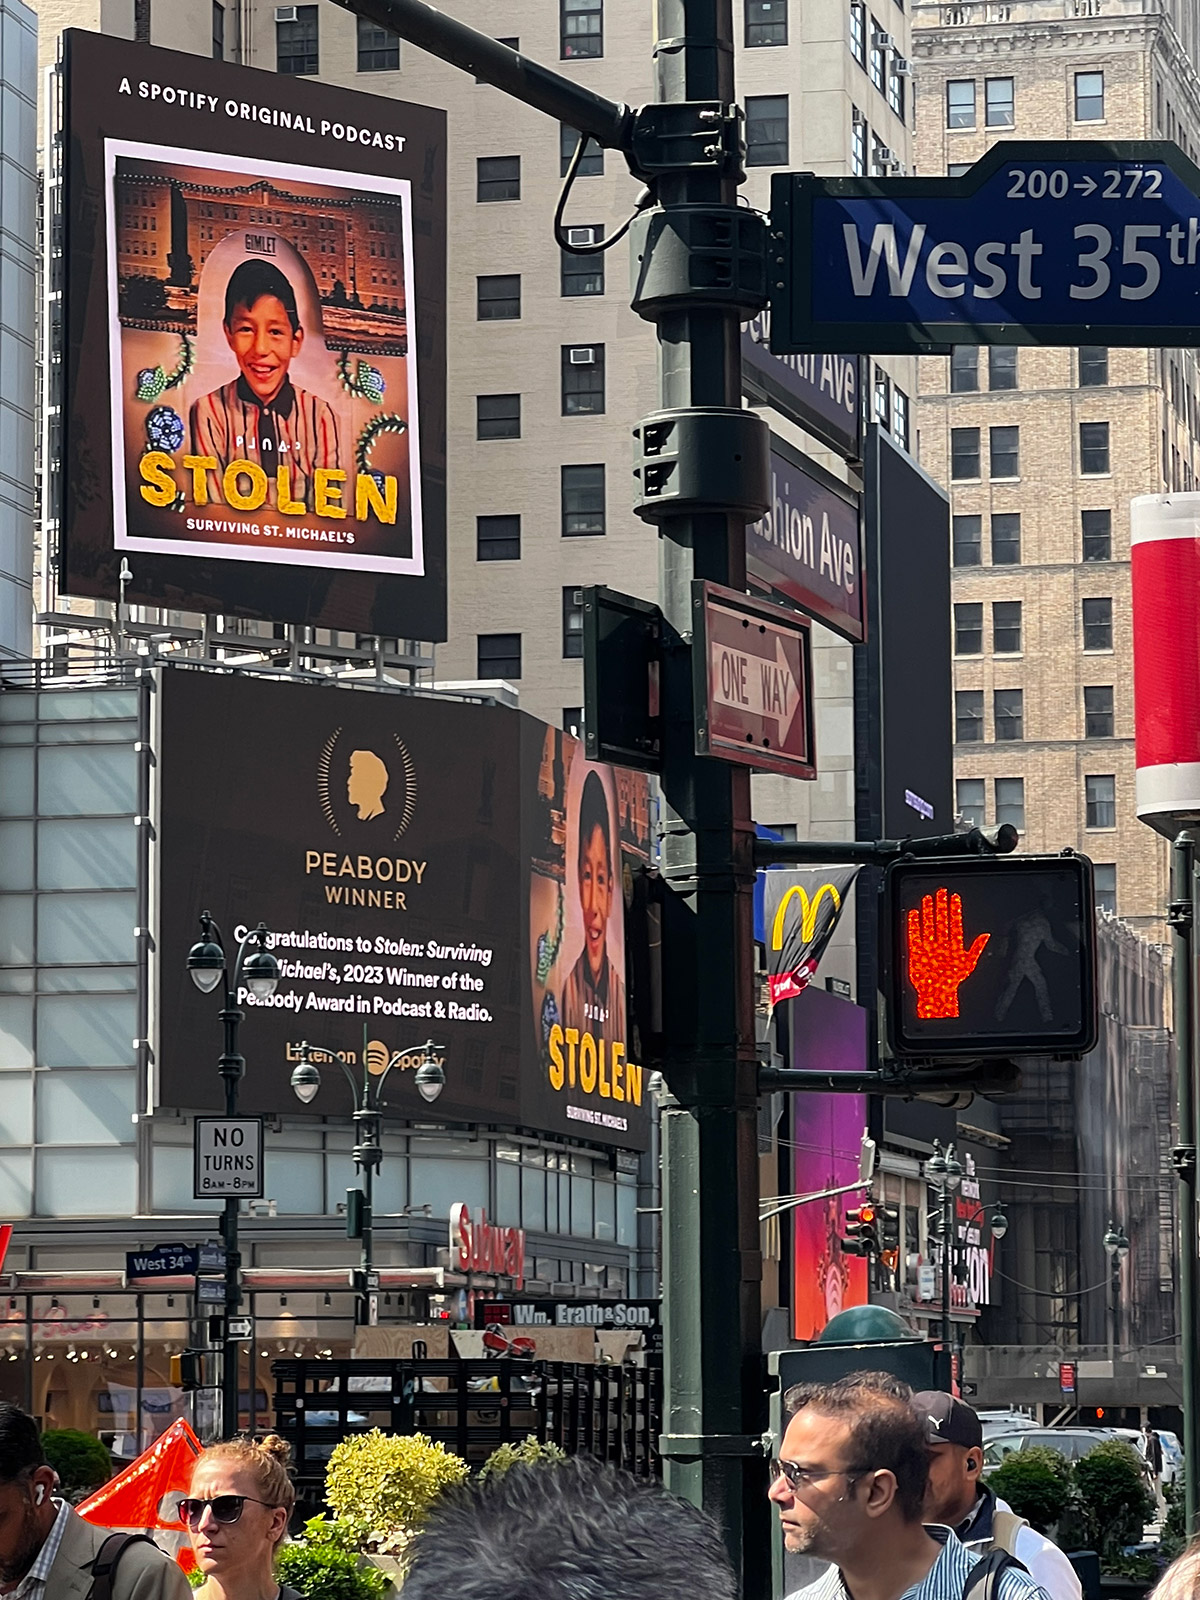 Photo of a busy street corner in New York City. Large electronic billboards show an image of a young smiling boy with the words 